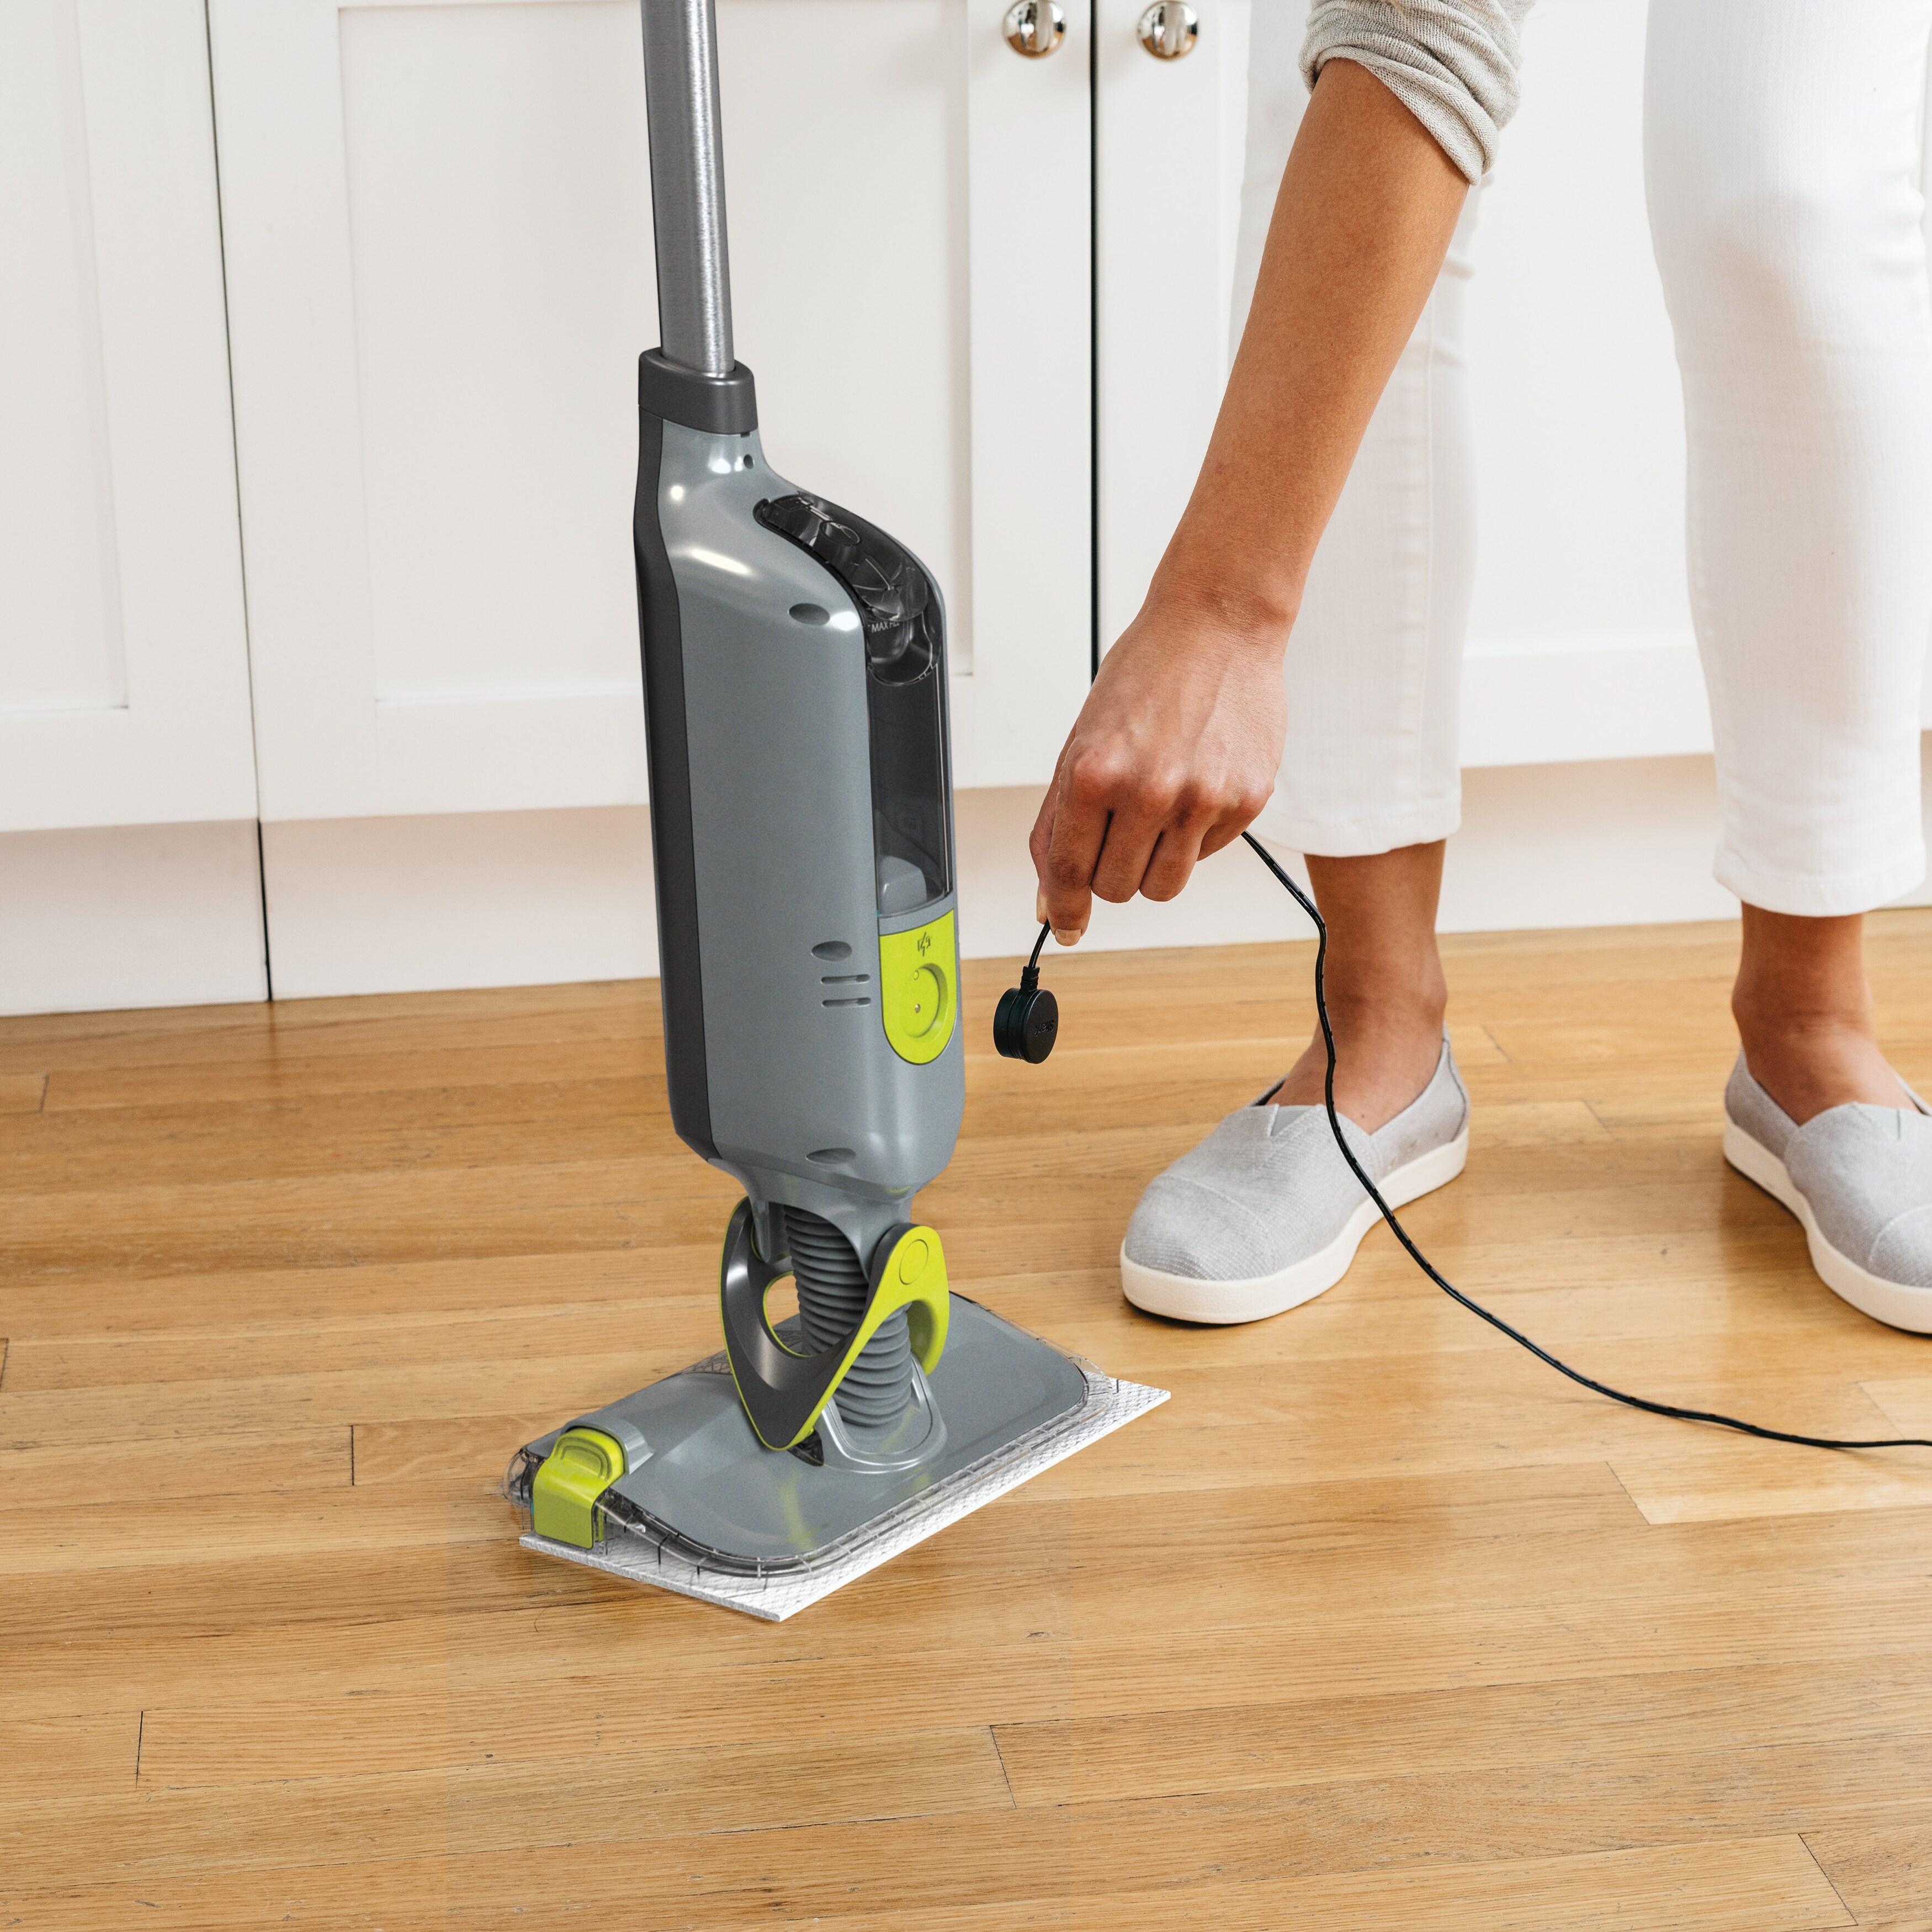 https://ak1.ostkcdn.com/images/products/is/images/direct/38ba10e88876a02860ab6eeeedea5be57ee3f951/Shark-VACMOP-Pro-Cordless-Hard-Floor-Vacuum-Mop-with-Disposable-VACMOP-Pad.jpg